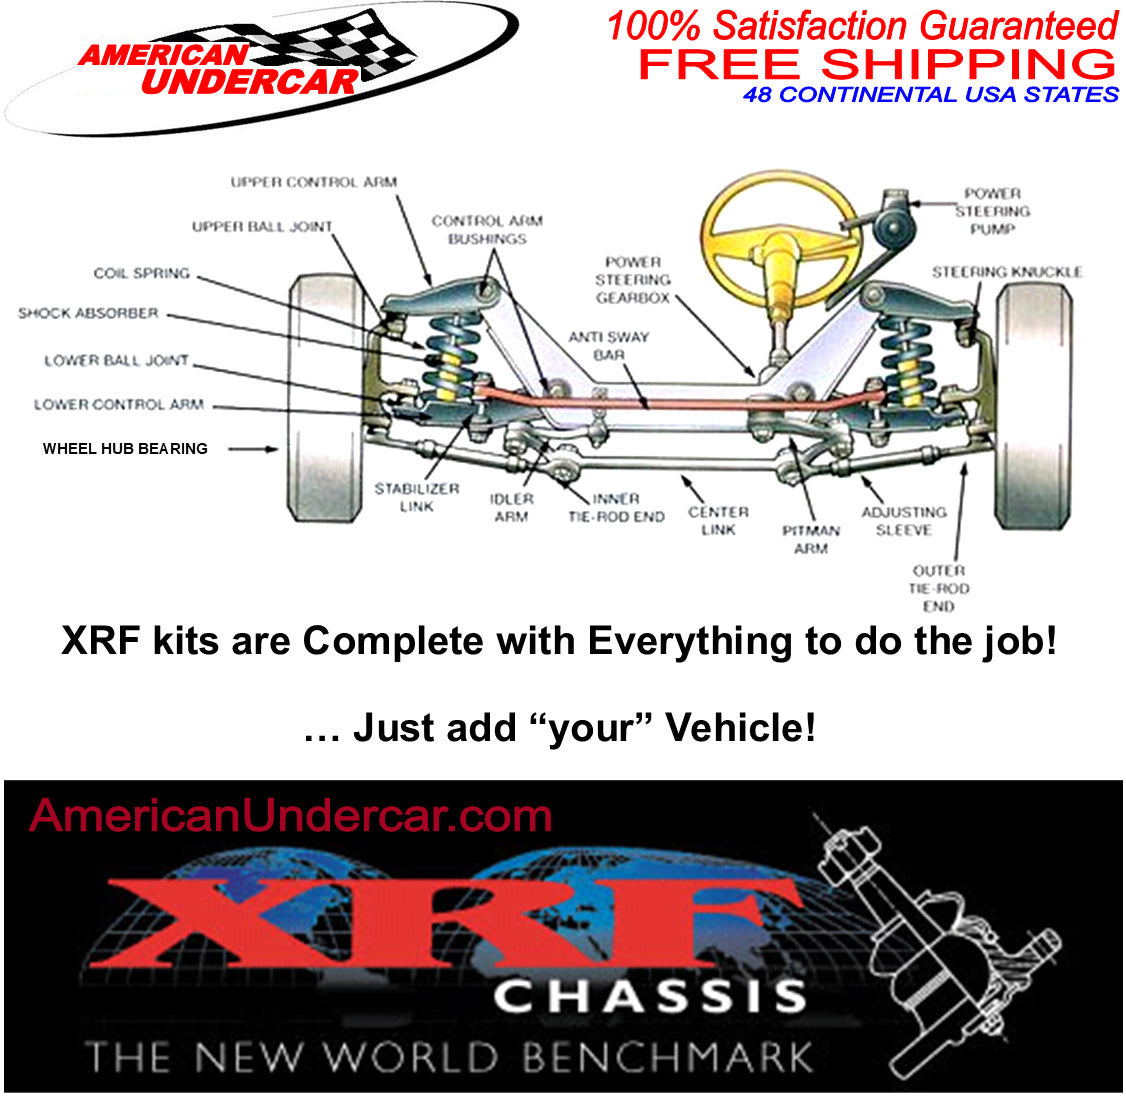 XRF Ball Joint Suspension Kit Upper & Lower for 1999-2004 Ford F450, F550 Super Duty with Mono Beam Axle